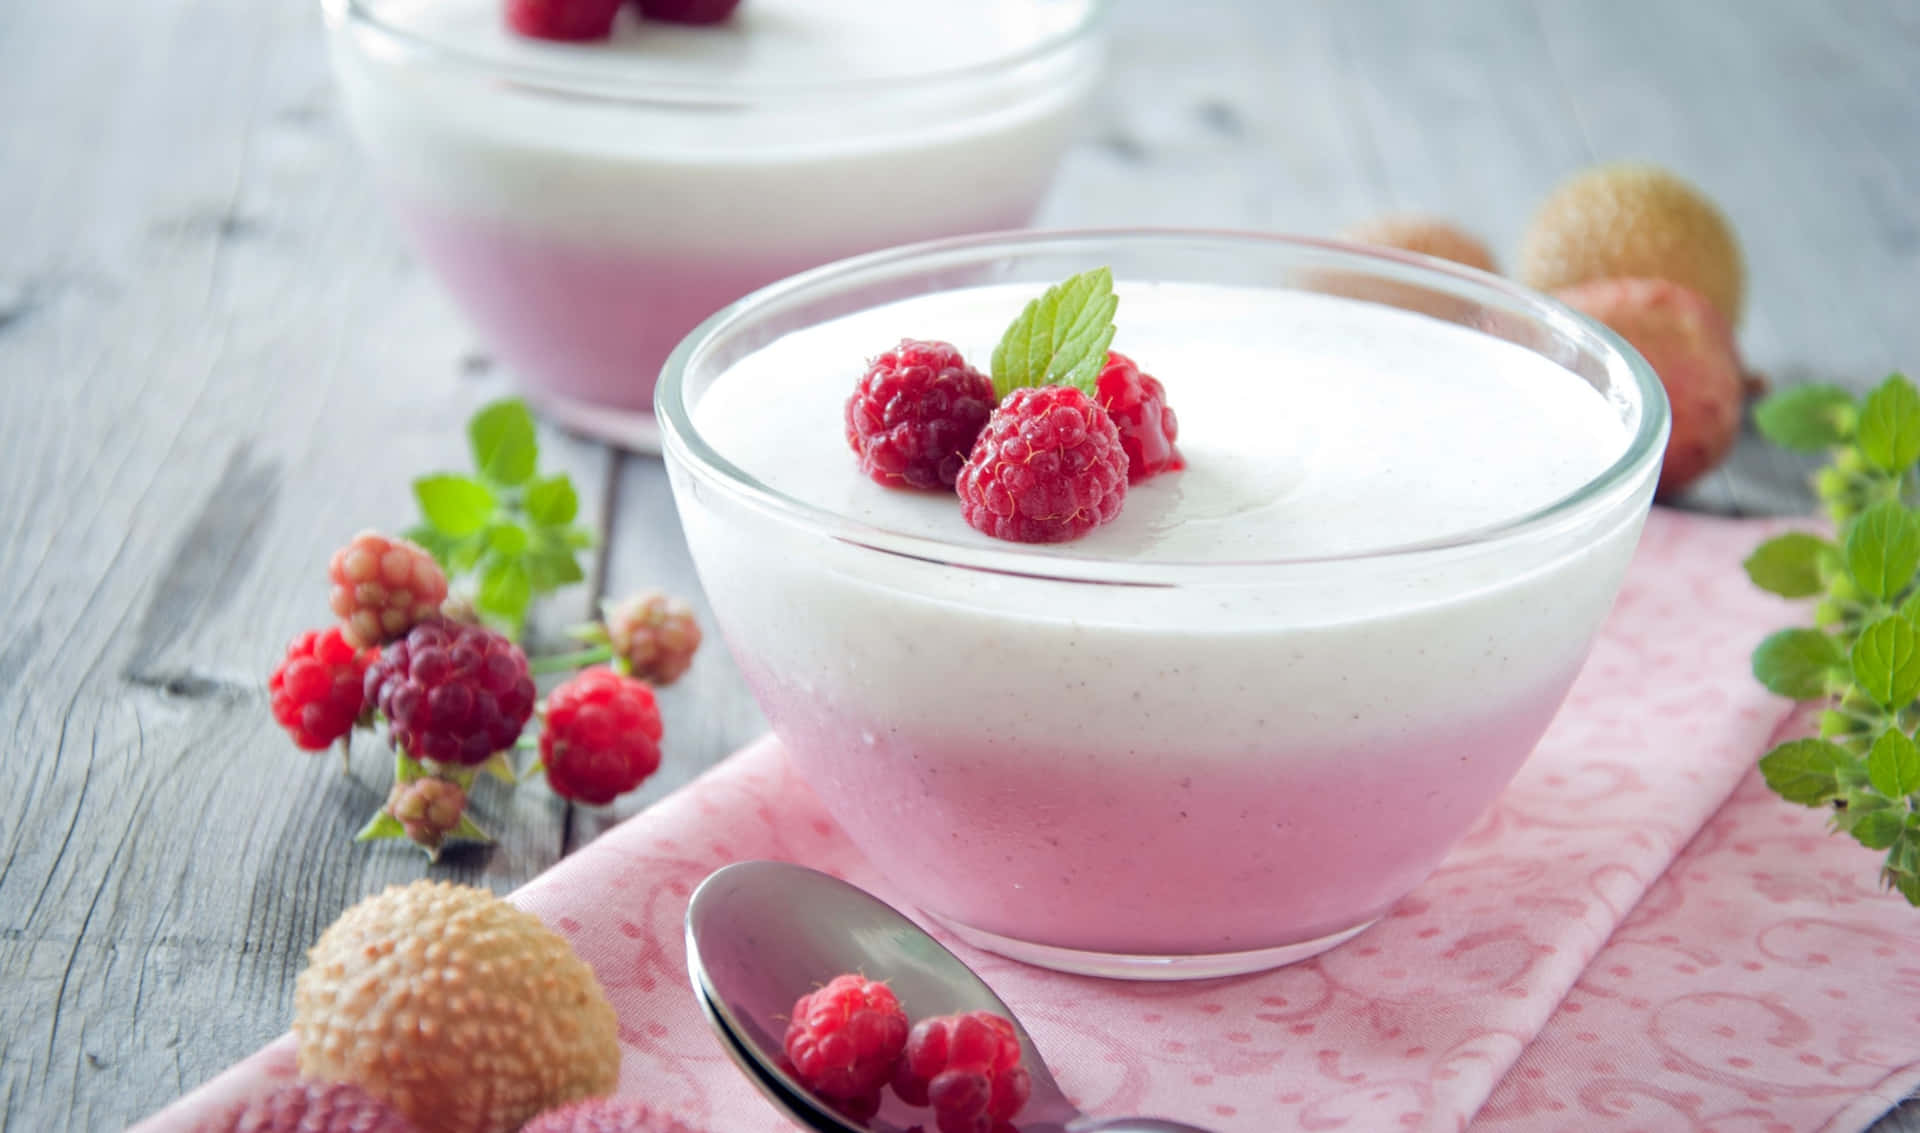 Two Cups Of Yogurt With Raspberries And Mint